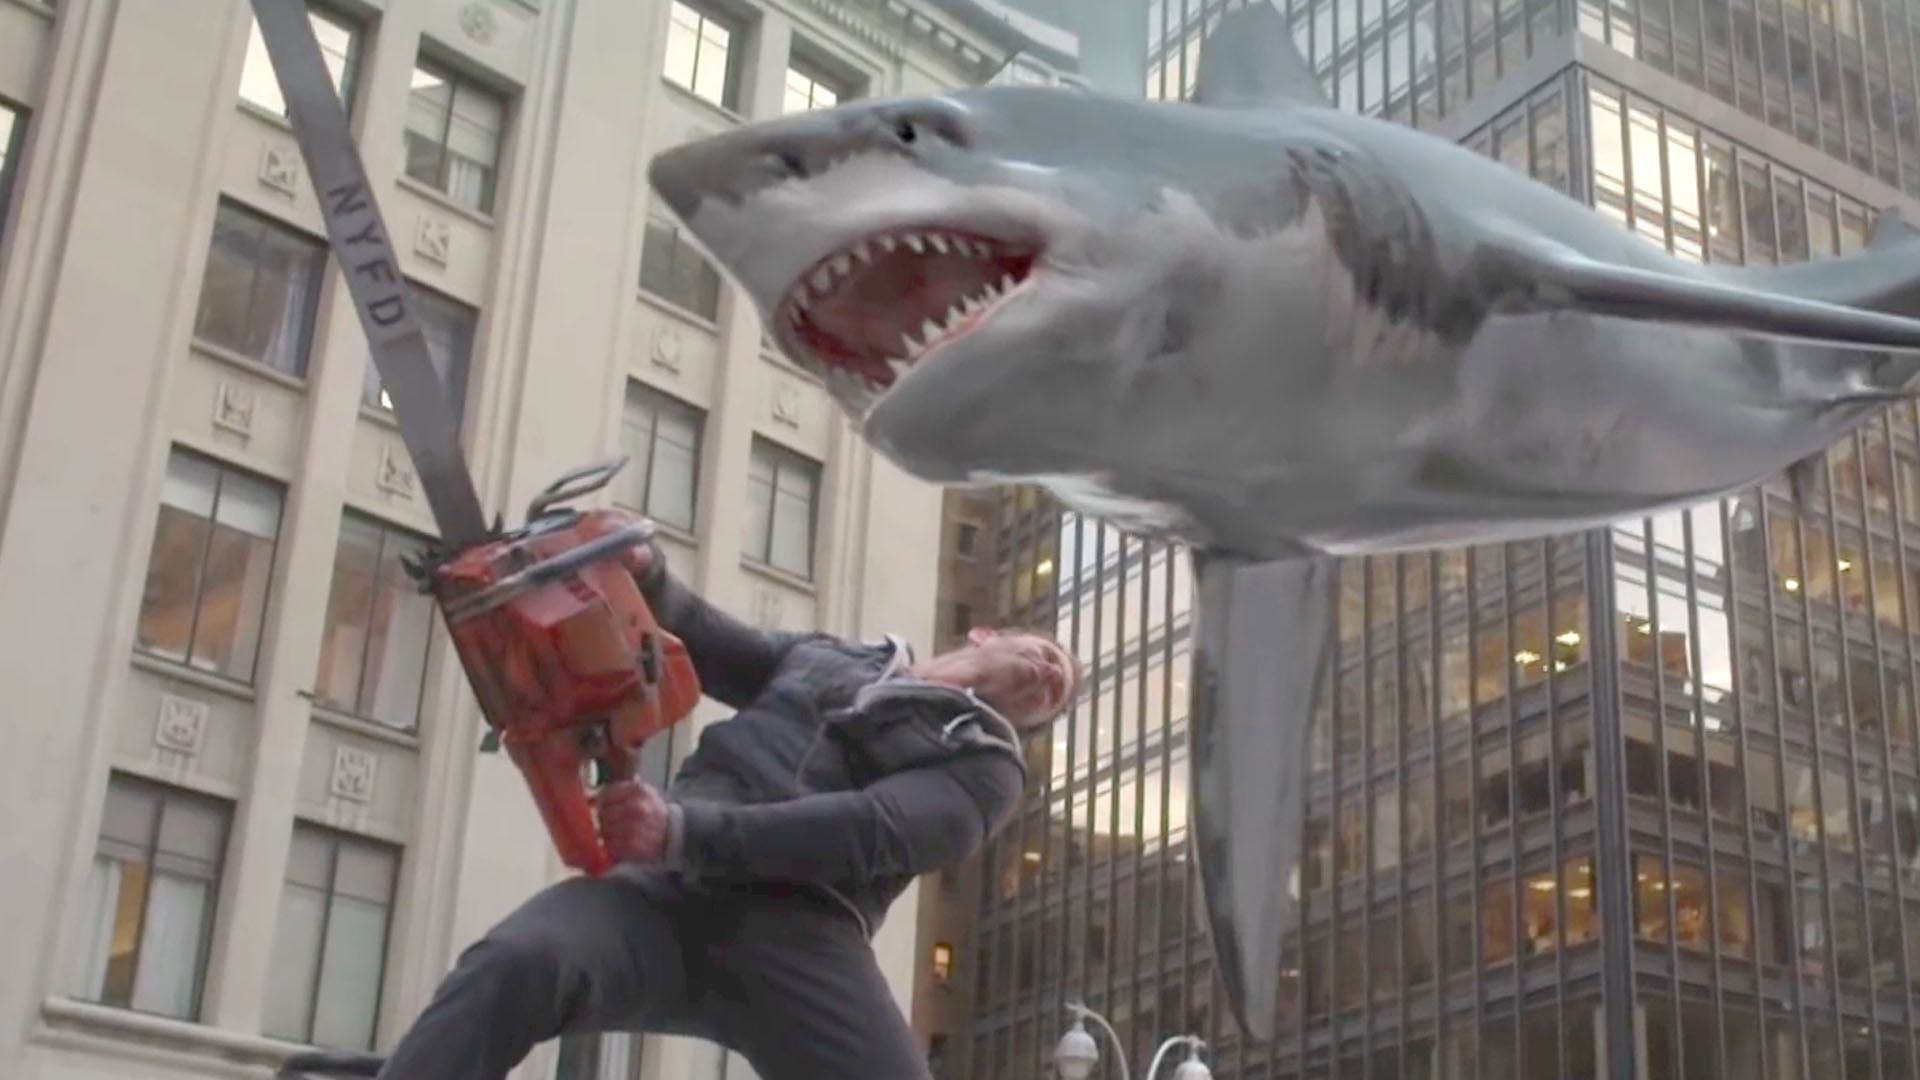 Sharknado 2 The Second One Trailer 1 Trailers And Videos Rotten Tomatoes